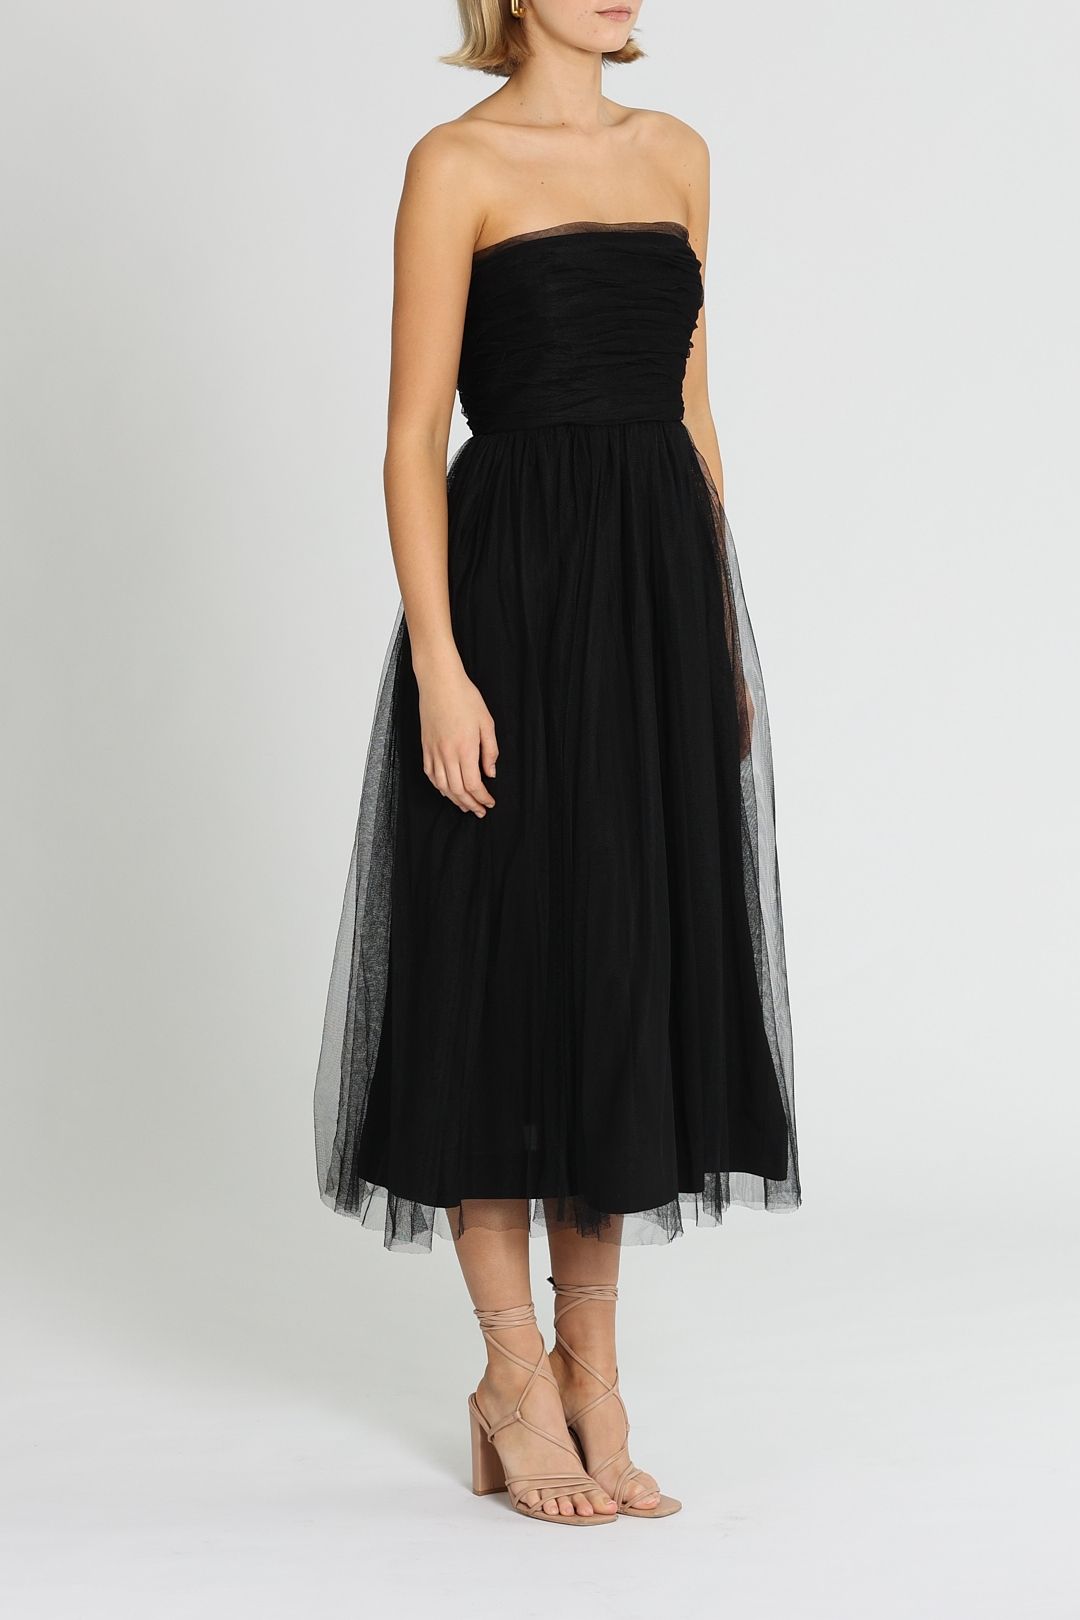 Zimmermann Tulle Strapless Midi Dress Fit and Flare